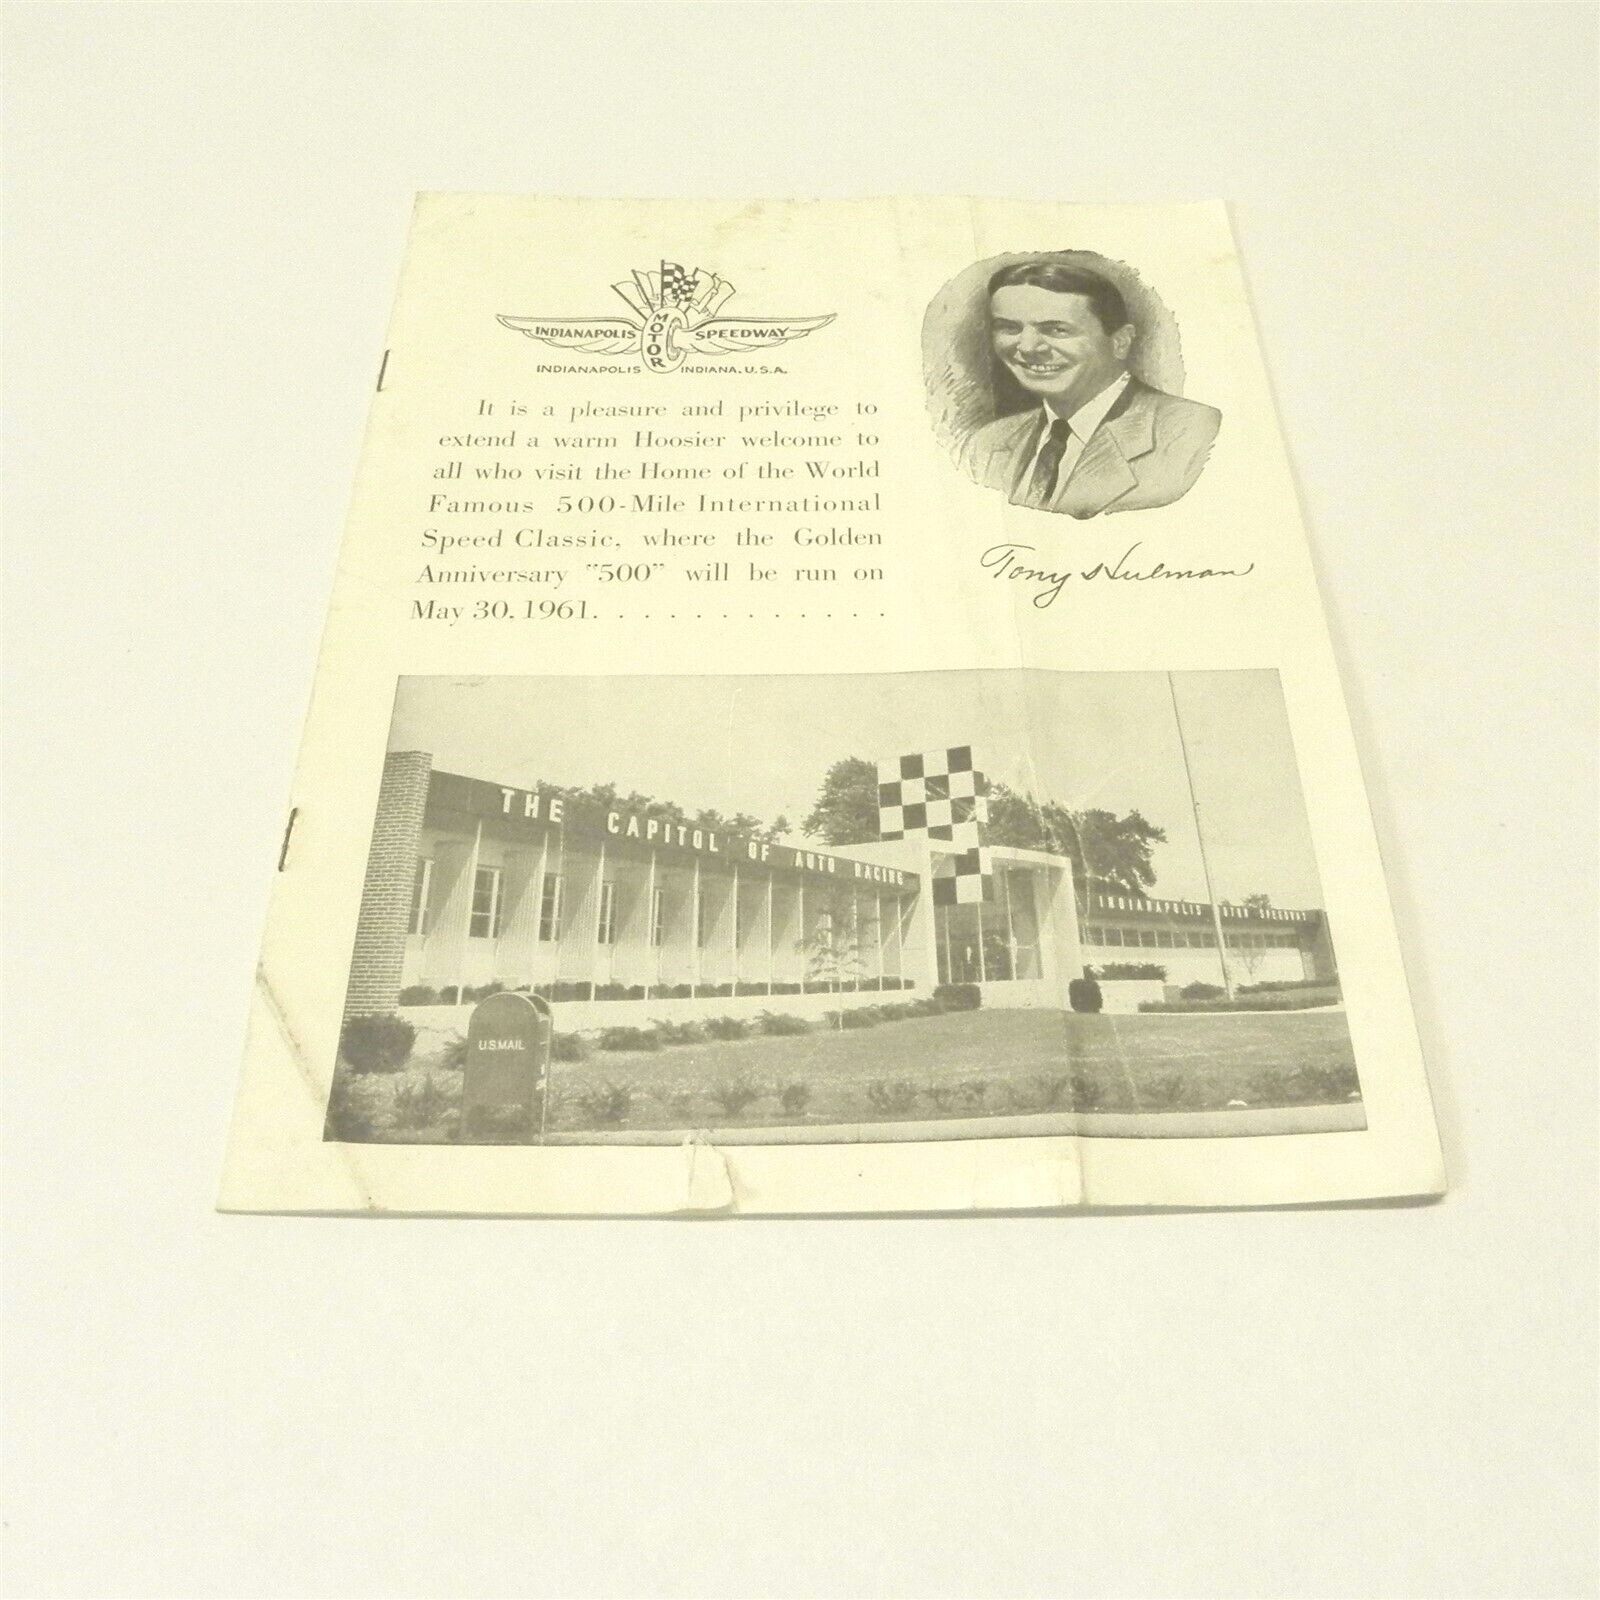 1961 INDY 500 MOTOR SPEEDWAY MUSEUM PAMPHLET USED FAIR CONDITION INFORMATION 